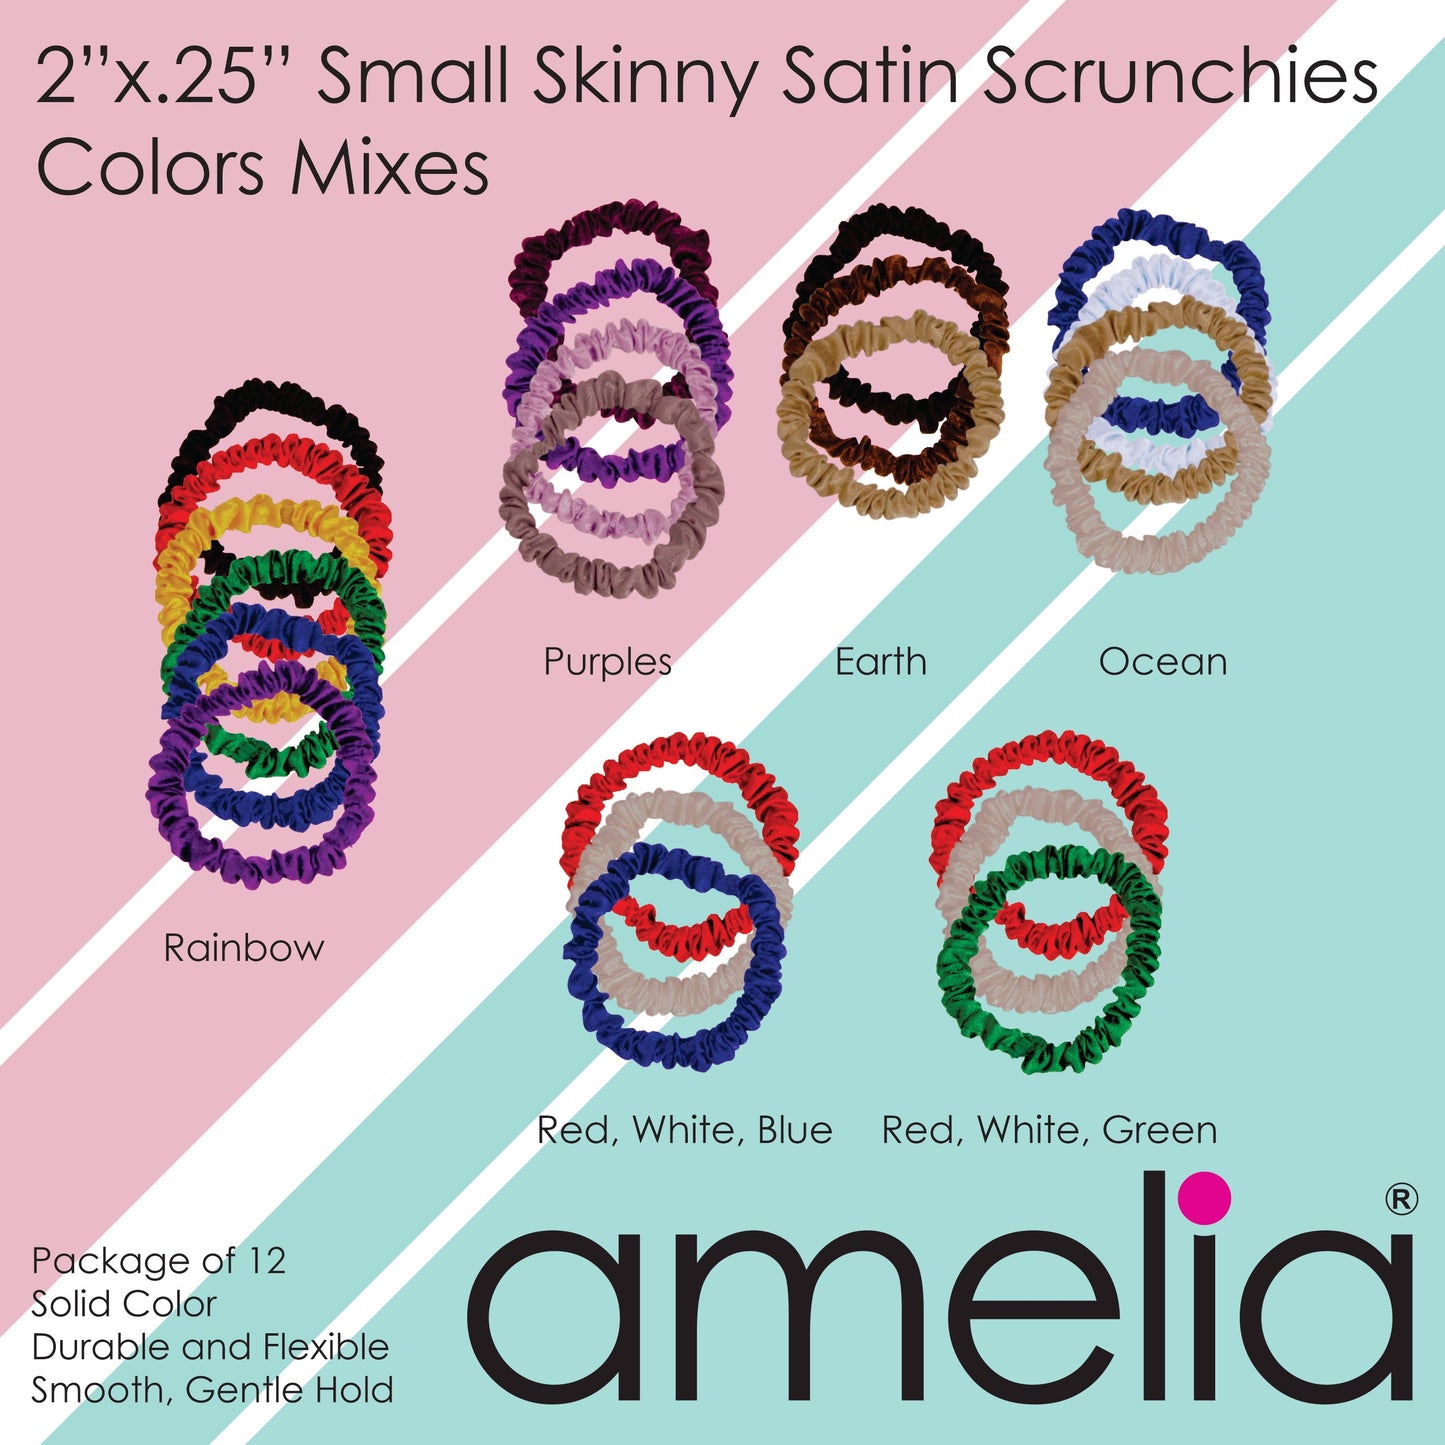 Amelia Beauty, Yellow Skinny Satin Scrunchies, 2in Diameter, Gentle and Strong Hold, No Snag, No Dents or Creases. 12 Pack - 12 Retail Packs